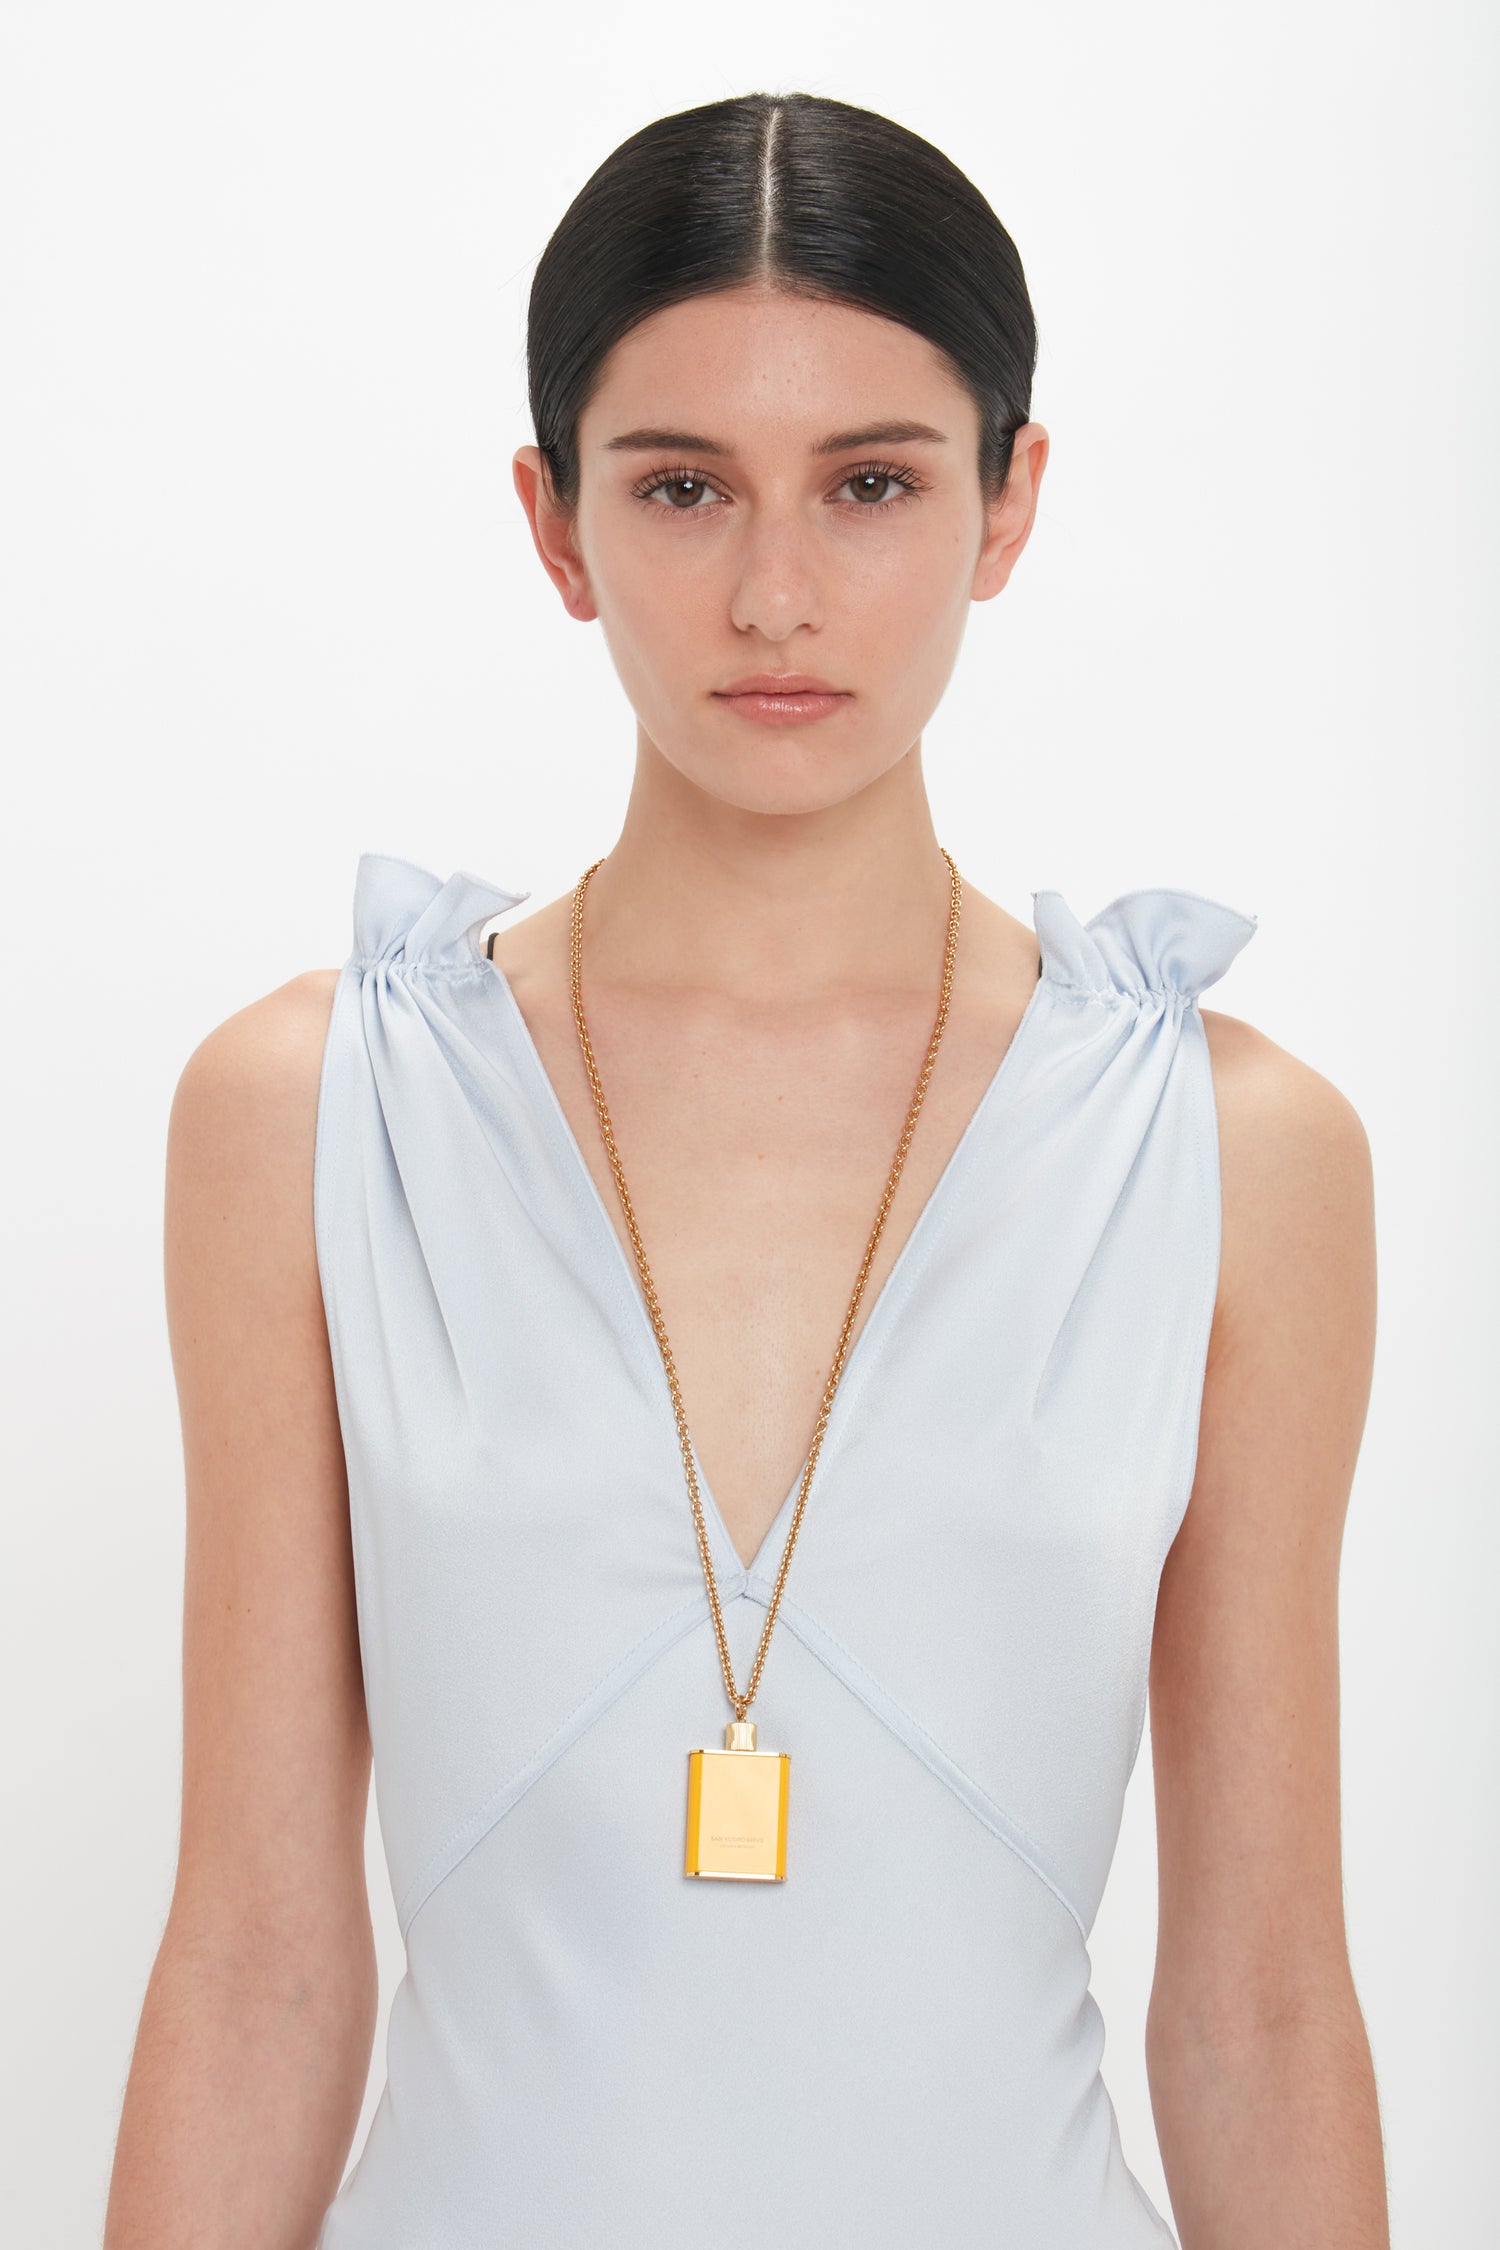 Woman in a light blue sleeveless dress, with minimal makeup and straight hair, wearing a long gold brushed brass Perfume Bottle Necklace In San Ysidro Drive by Victoria Beckham. She is standing against a white background.